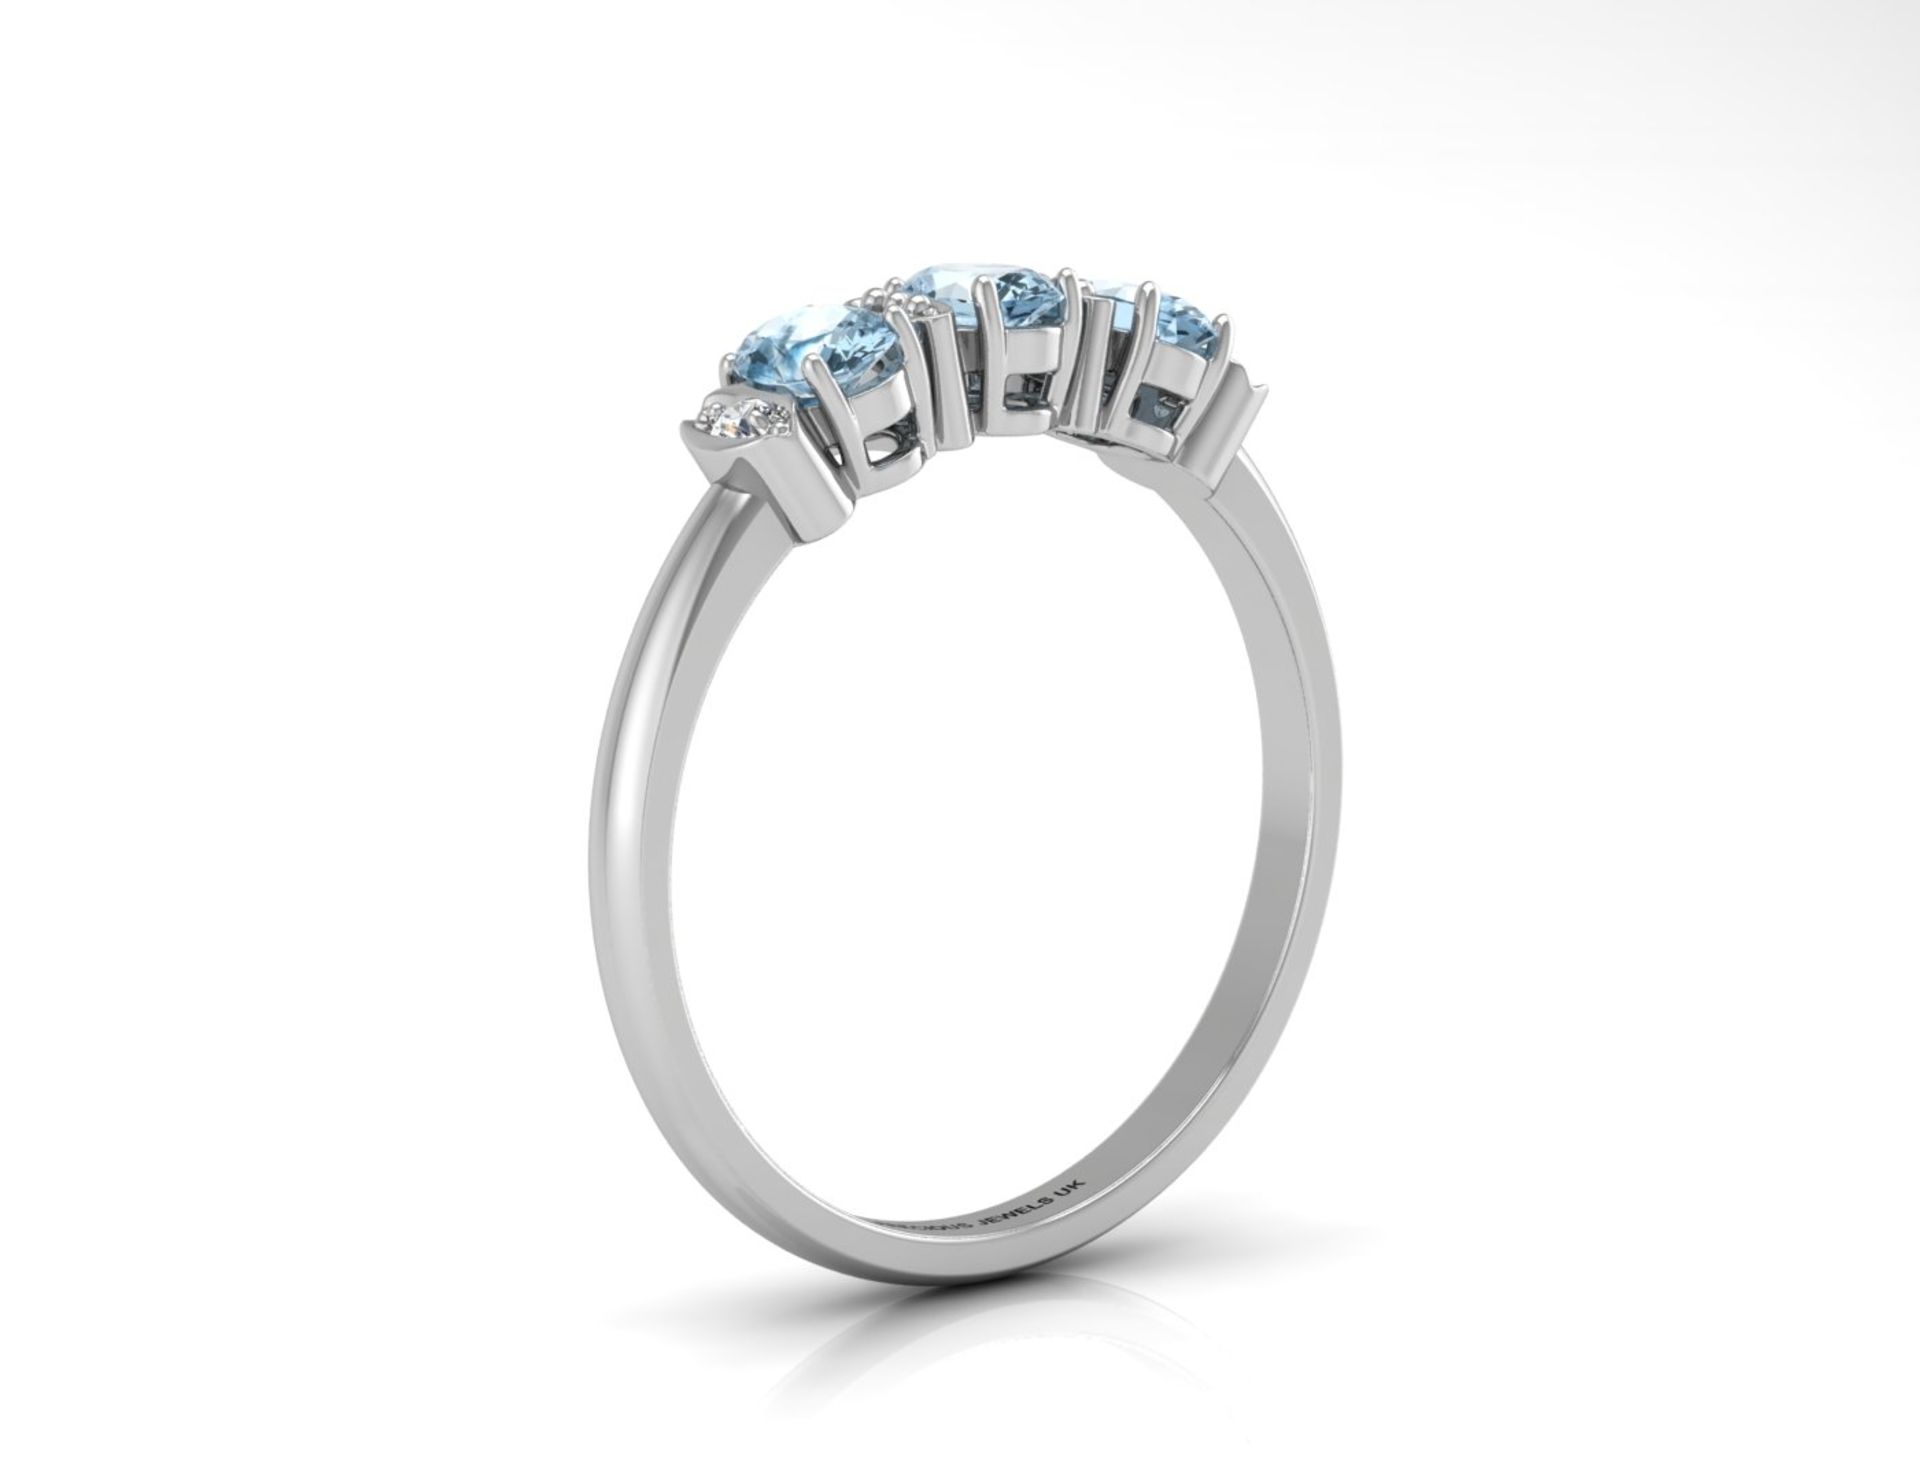 9ct White Gold Semi Eternity Diamond and Blue Topaz Ring (BT0.63) 0.01 Carats - Image 2 of 5